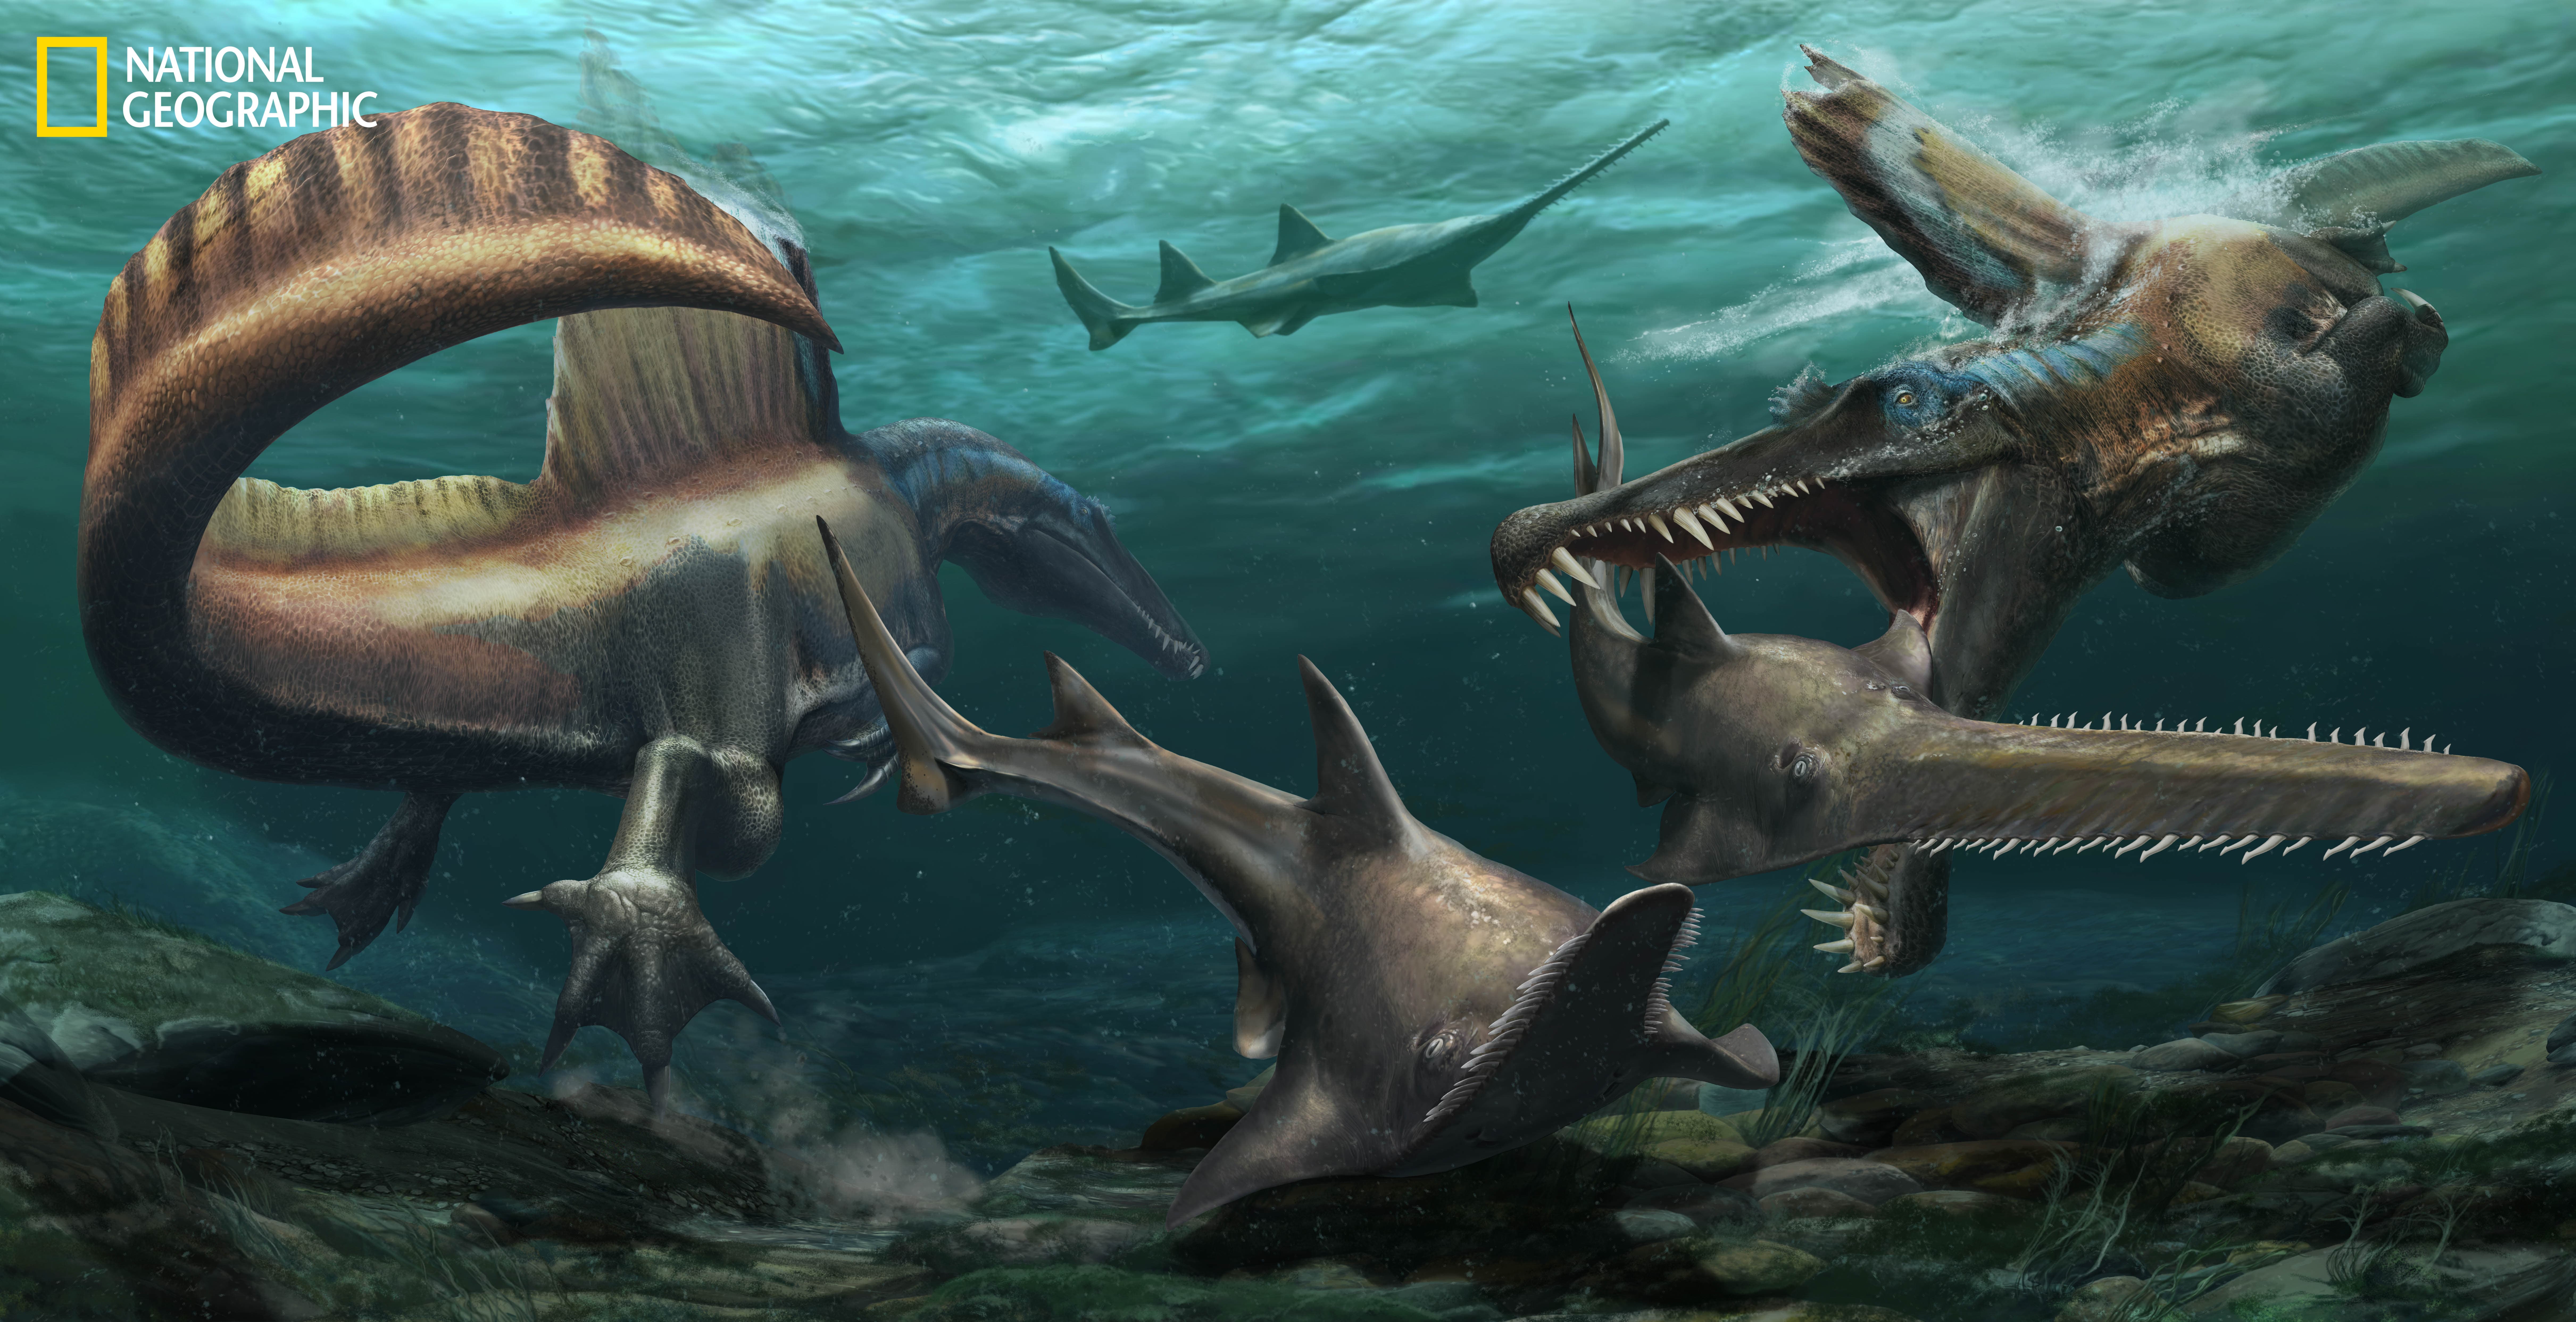 Two Spinosaurus hunt Onchopristis, a prehistoric sawfish, in the waters of the Kem Kem river system in what is now Morocco. (Credit: Jason Treat, NG Staff, and Mesa Schumacher. Art: Davide Bonadonna. Source: Nizar Ibrahim, University of Detroit Mercy)